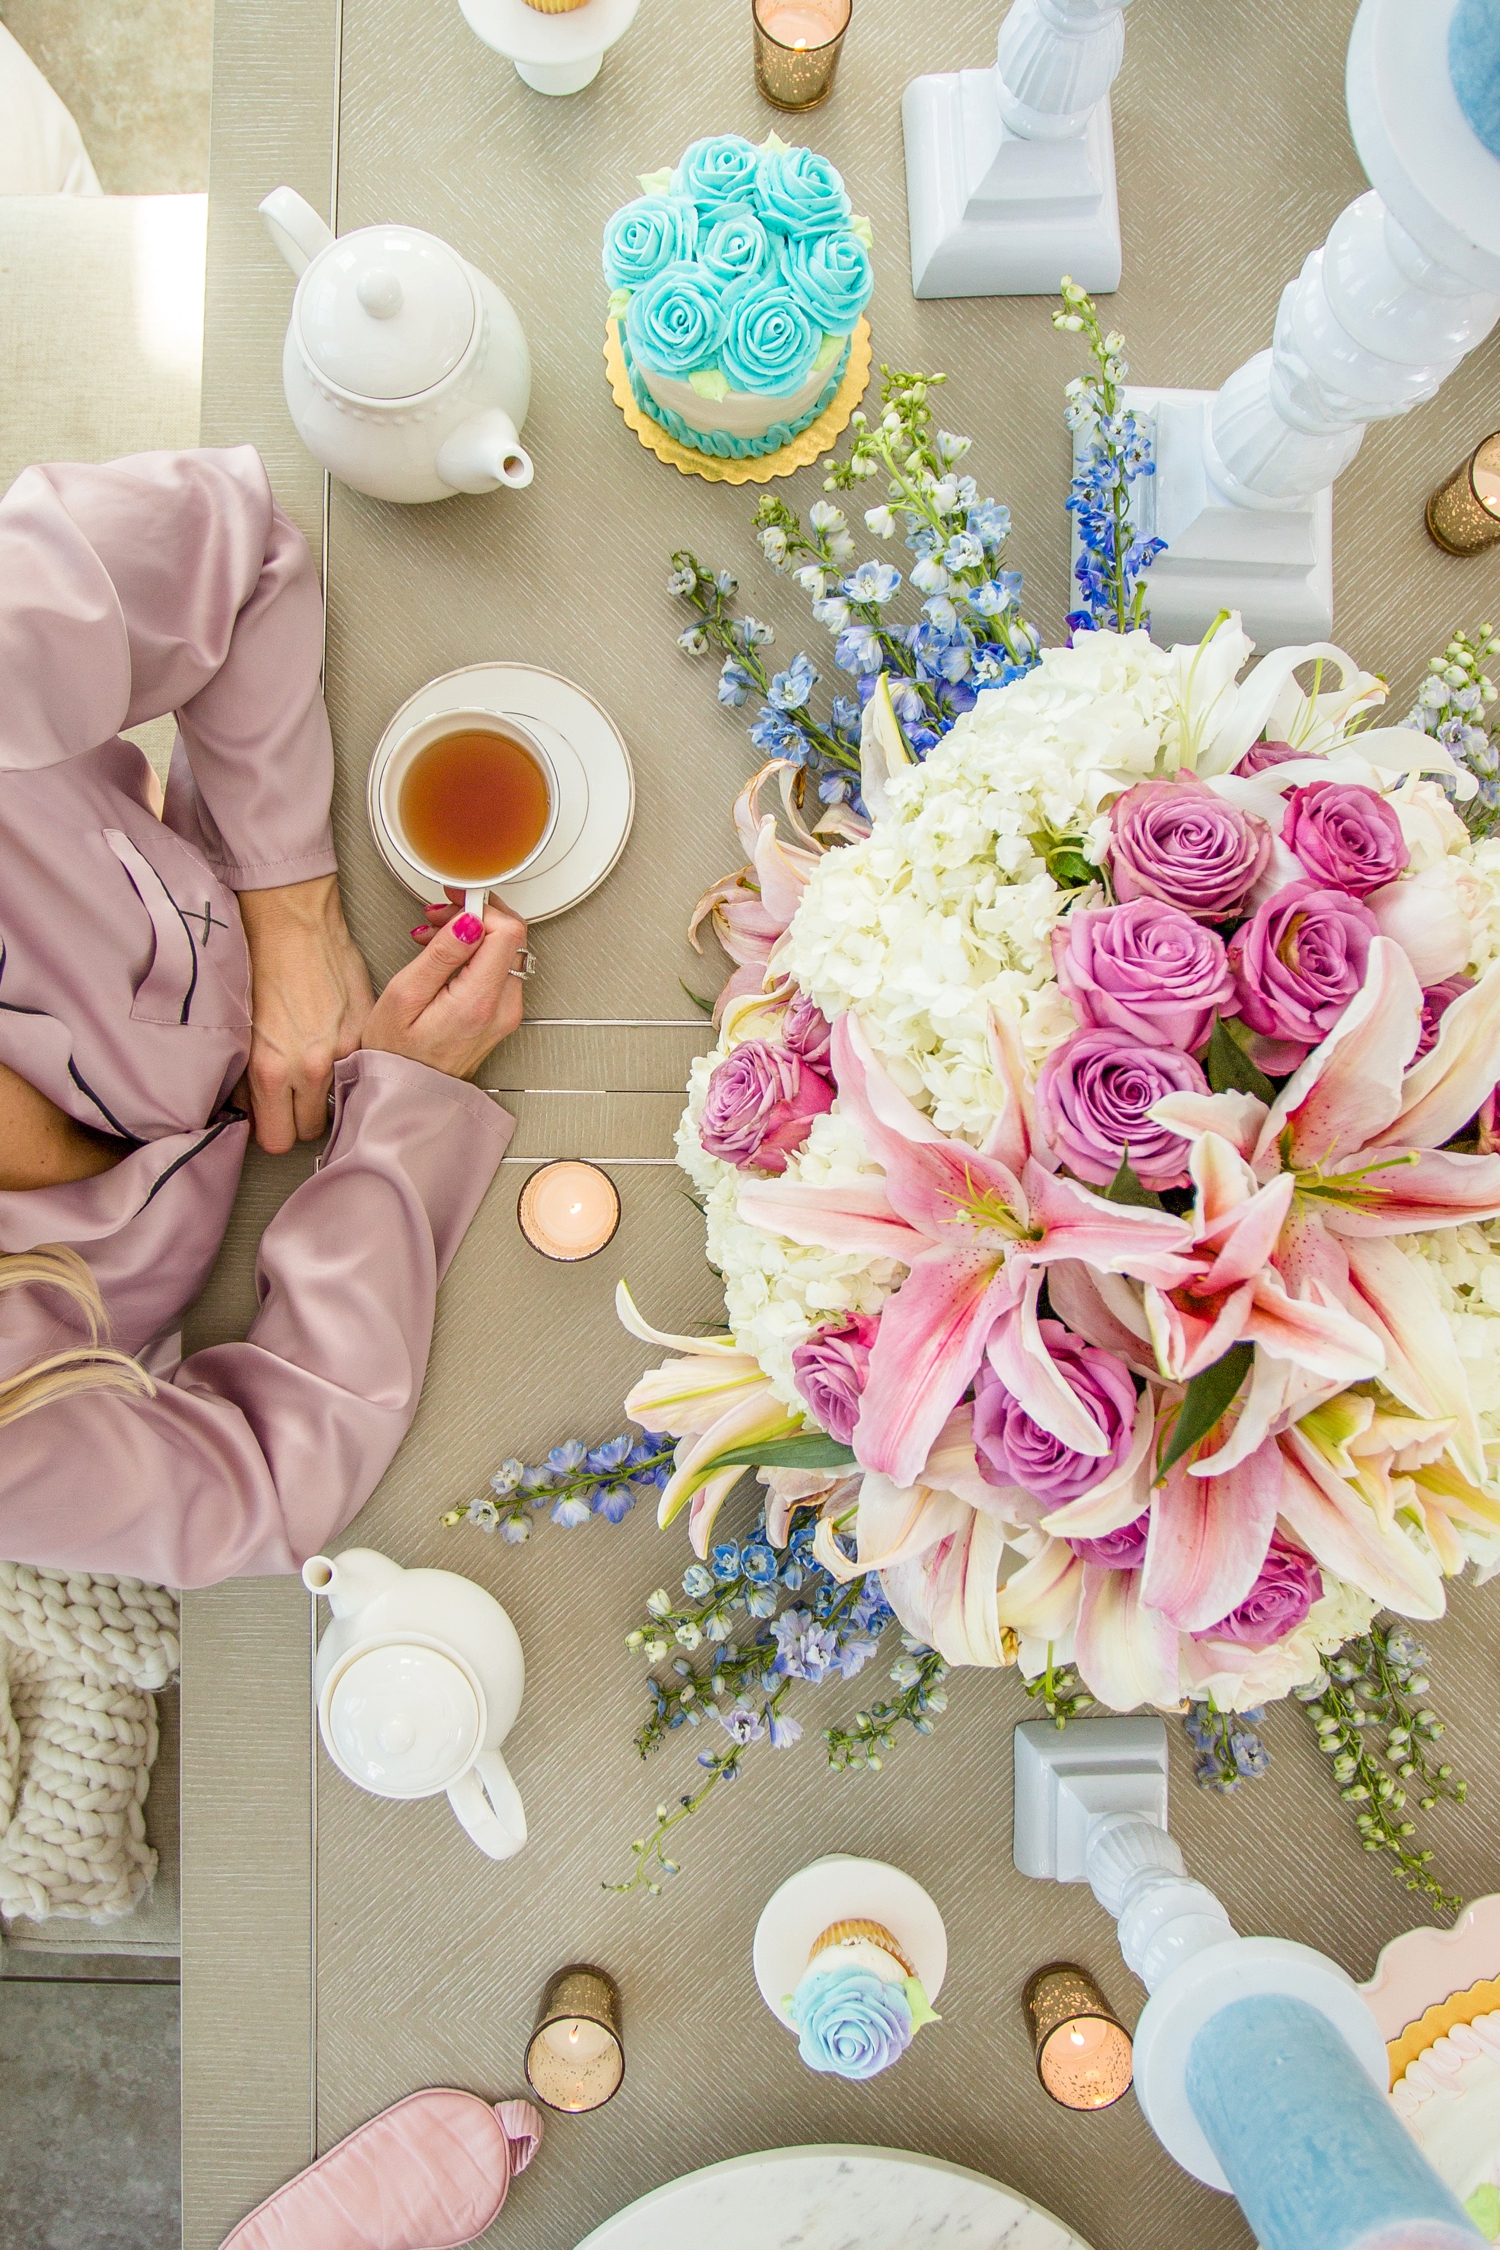  All photos are styled by Christi - including the epic flower arrangement! 